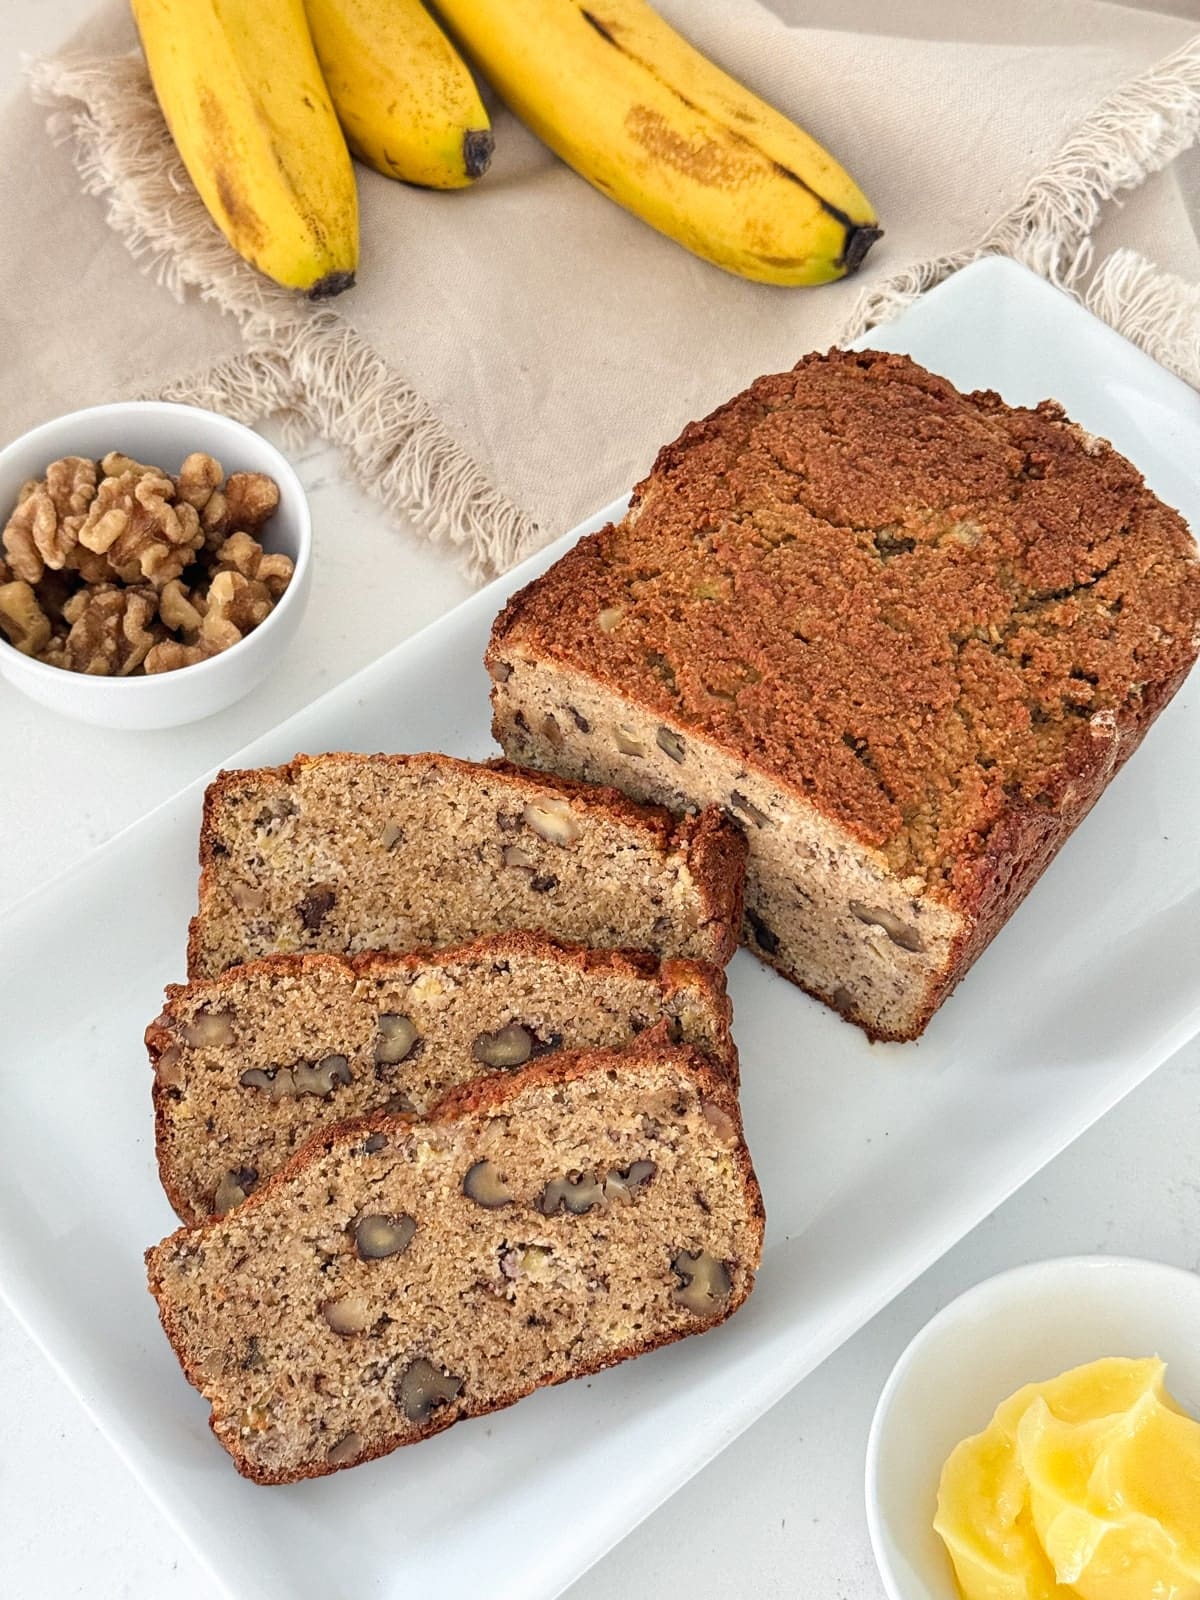 Three slices of gluten-free banana bread on a white plate, next to bowls of walnuts and ghee.